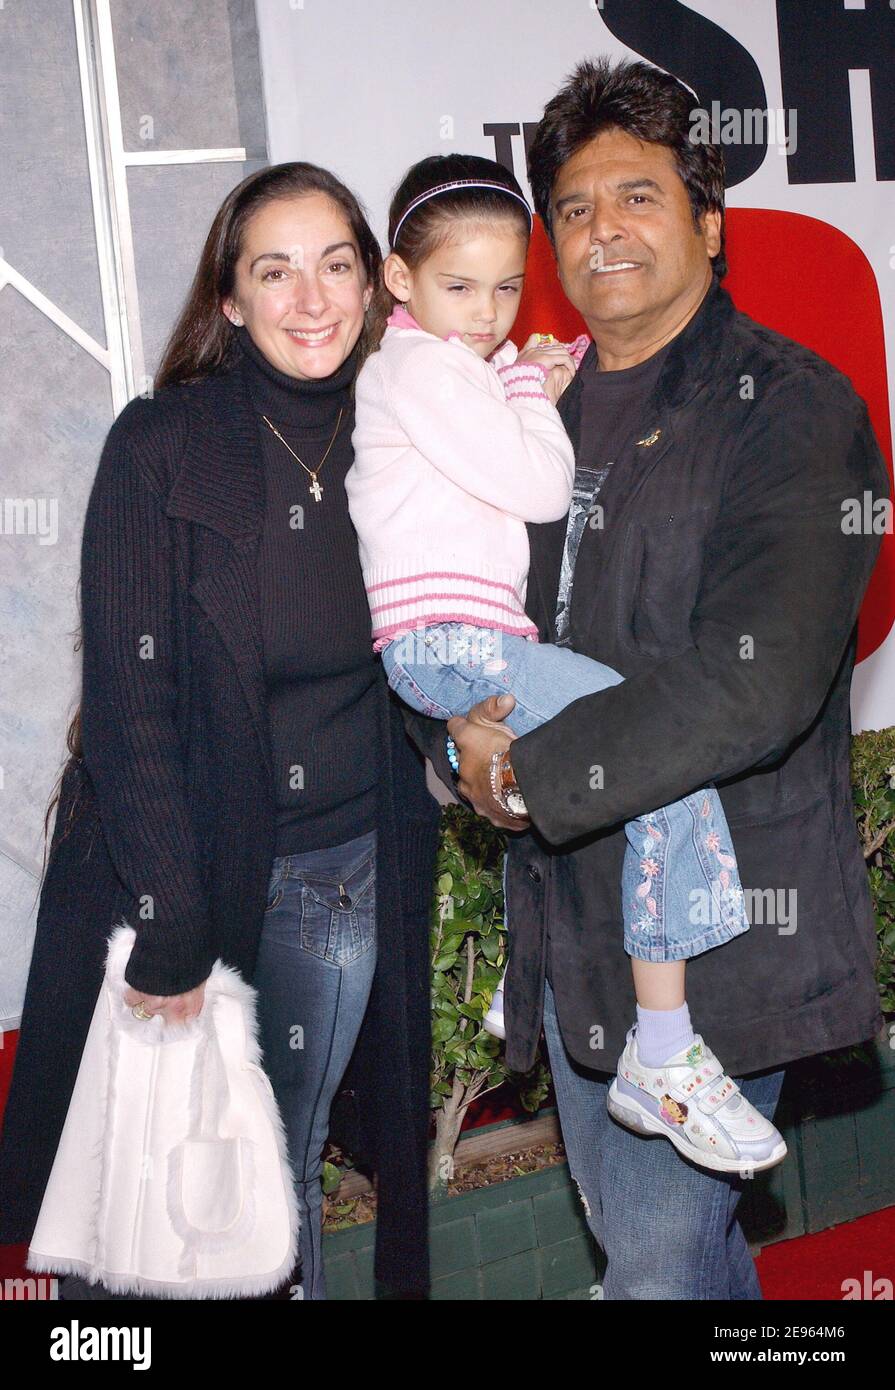 'Erik Estrada and family attend the world premiere of Walt Disney Pictures' ''The Shaggy Dog'' at El Capitan Theatre in Hollywood. Los Angeles, March 7, 2006. (Pictured: Erik Estrada). Photo by Lionel Hahn/AbacaUsa.com' Stock Photo